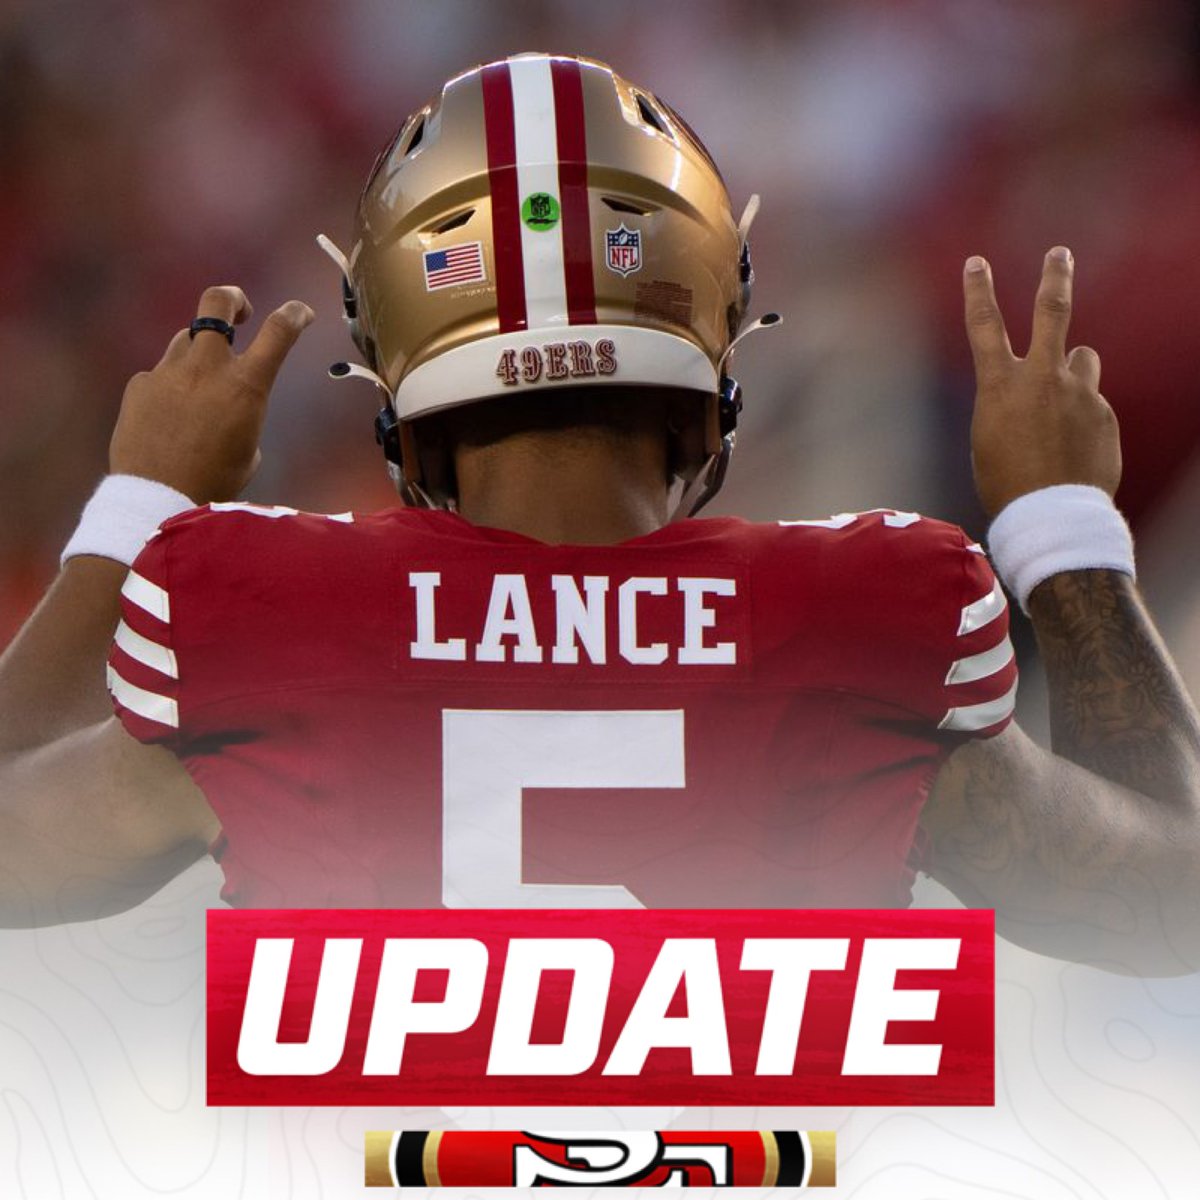 #49ers Trey Lance is expected to be back in the building today, per John Lynch on @KNBR